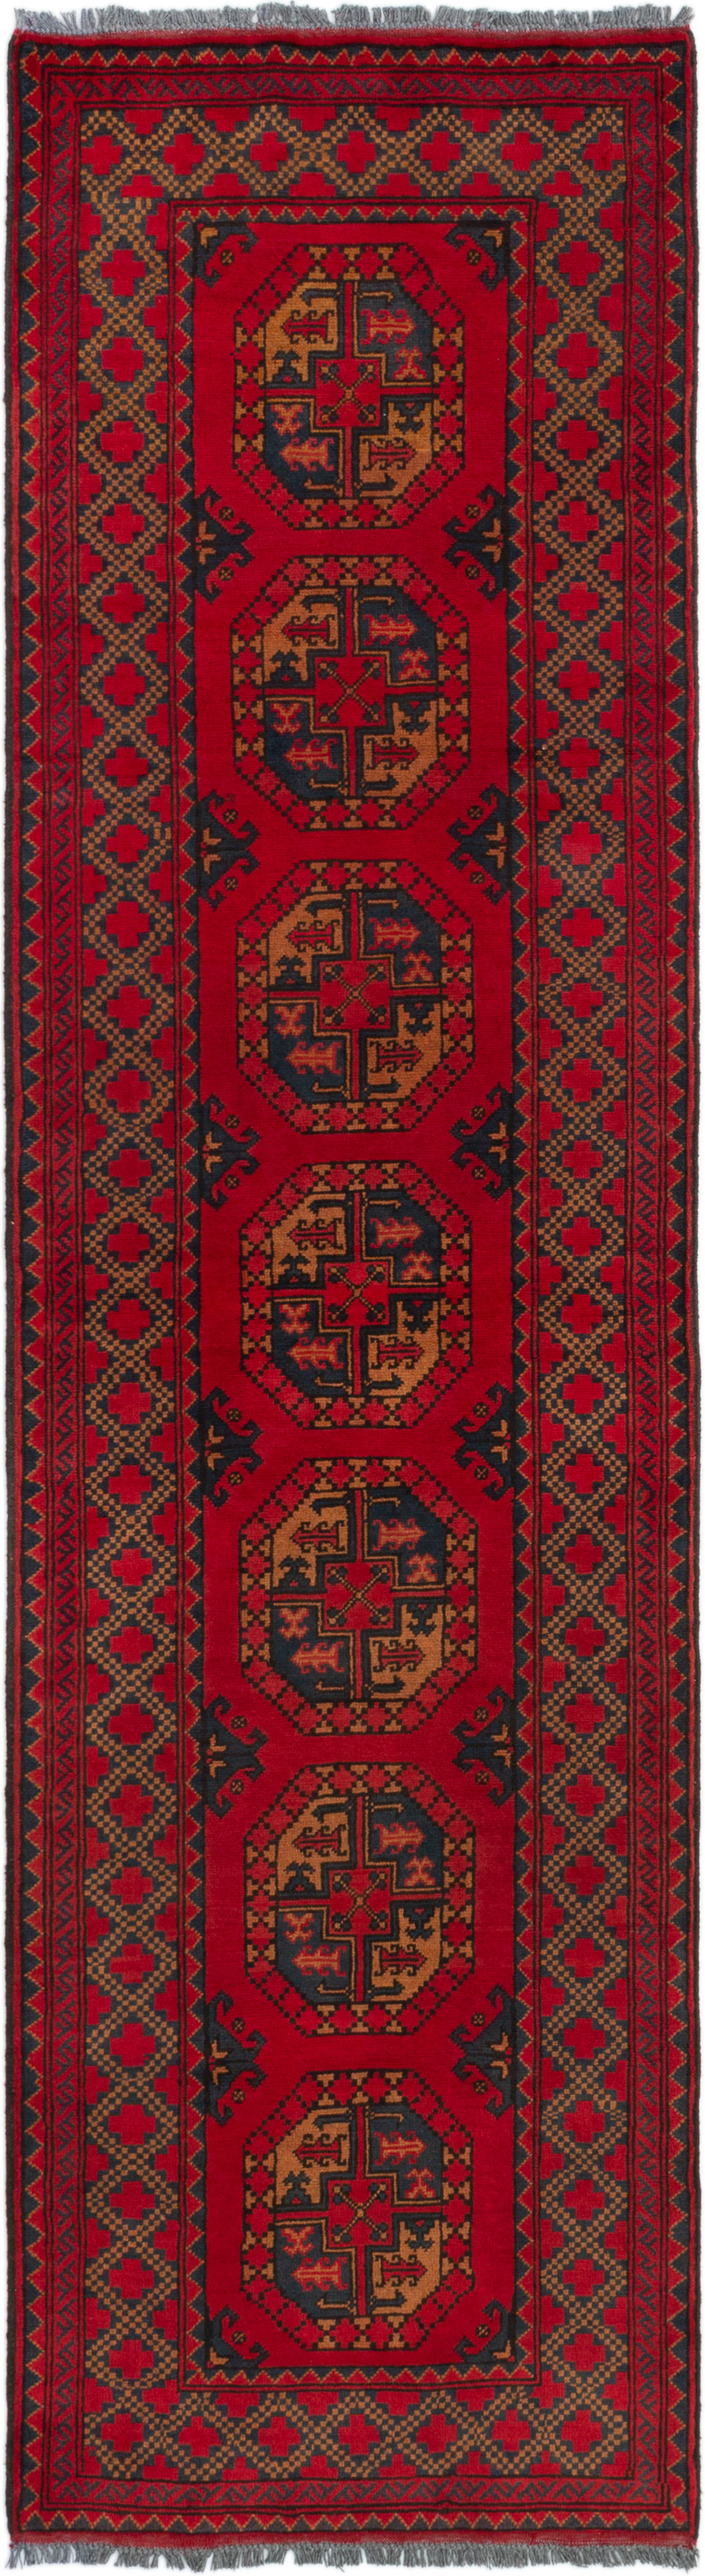 Hand-knotted Finest Kargahi Red Wool Rug 2'8" x 10'1" Size: 2'8" x 10'1"  